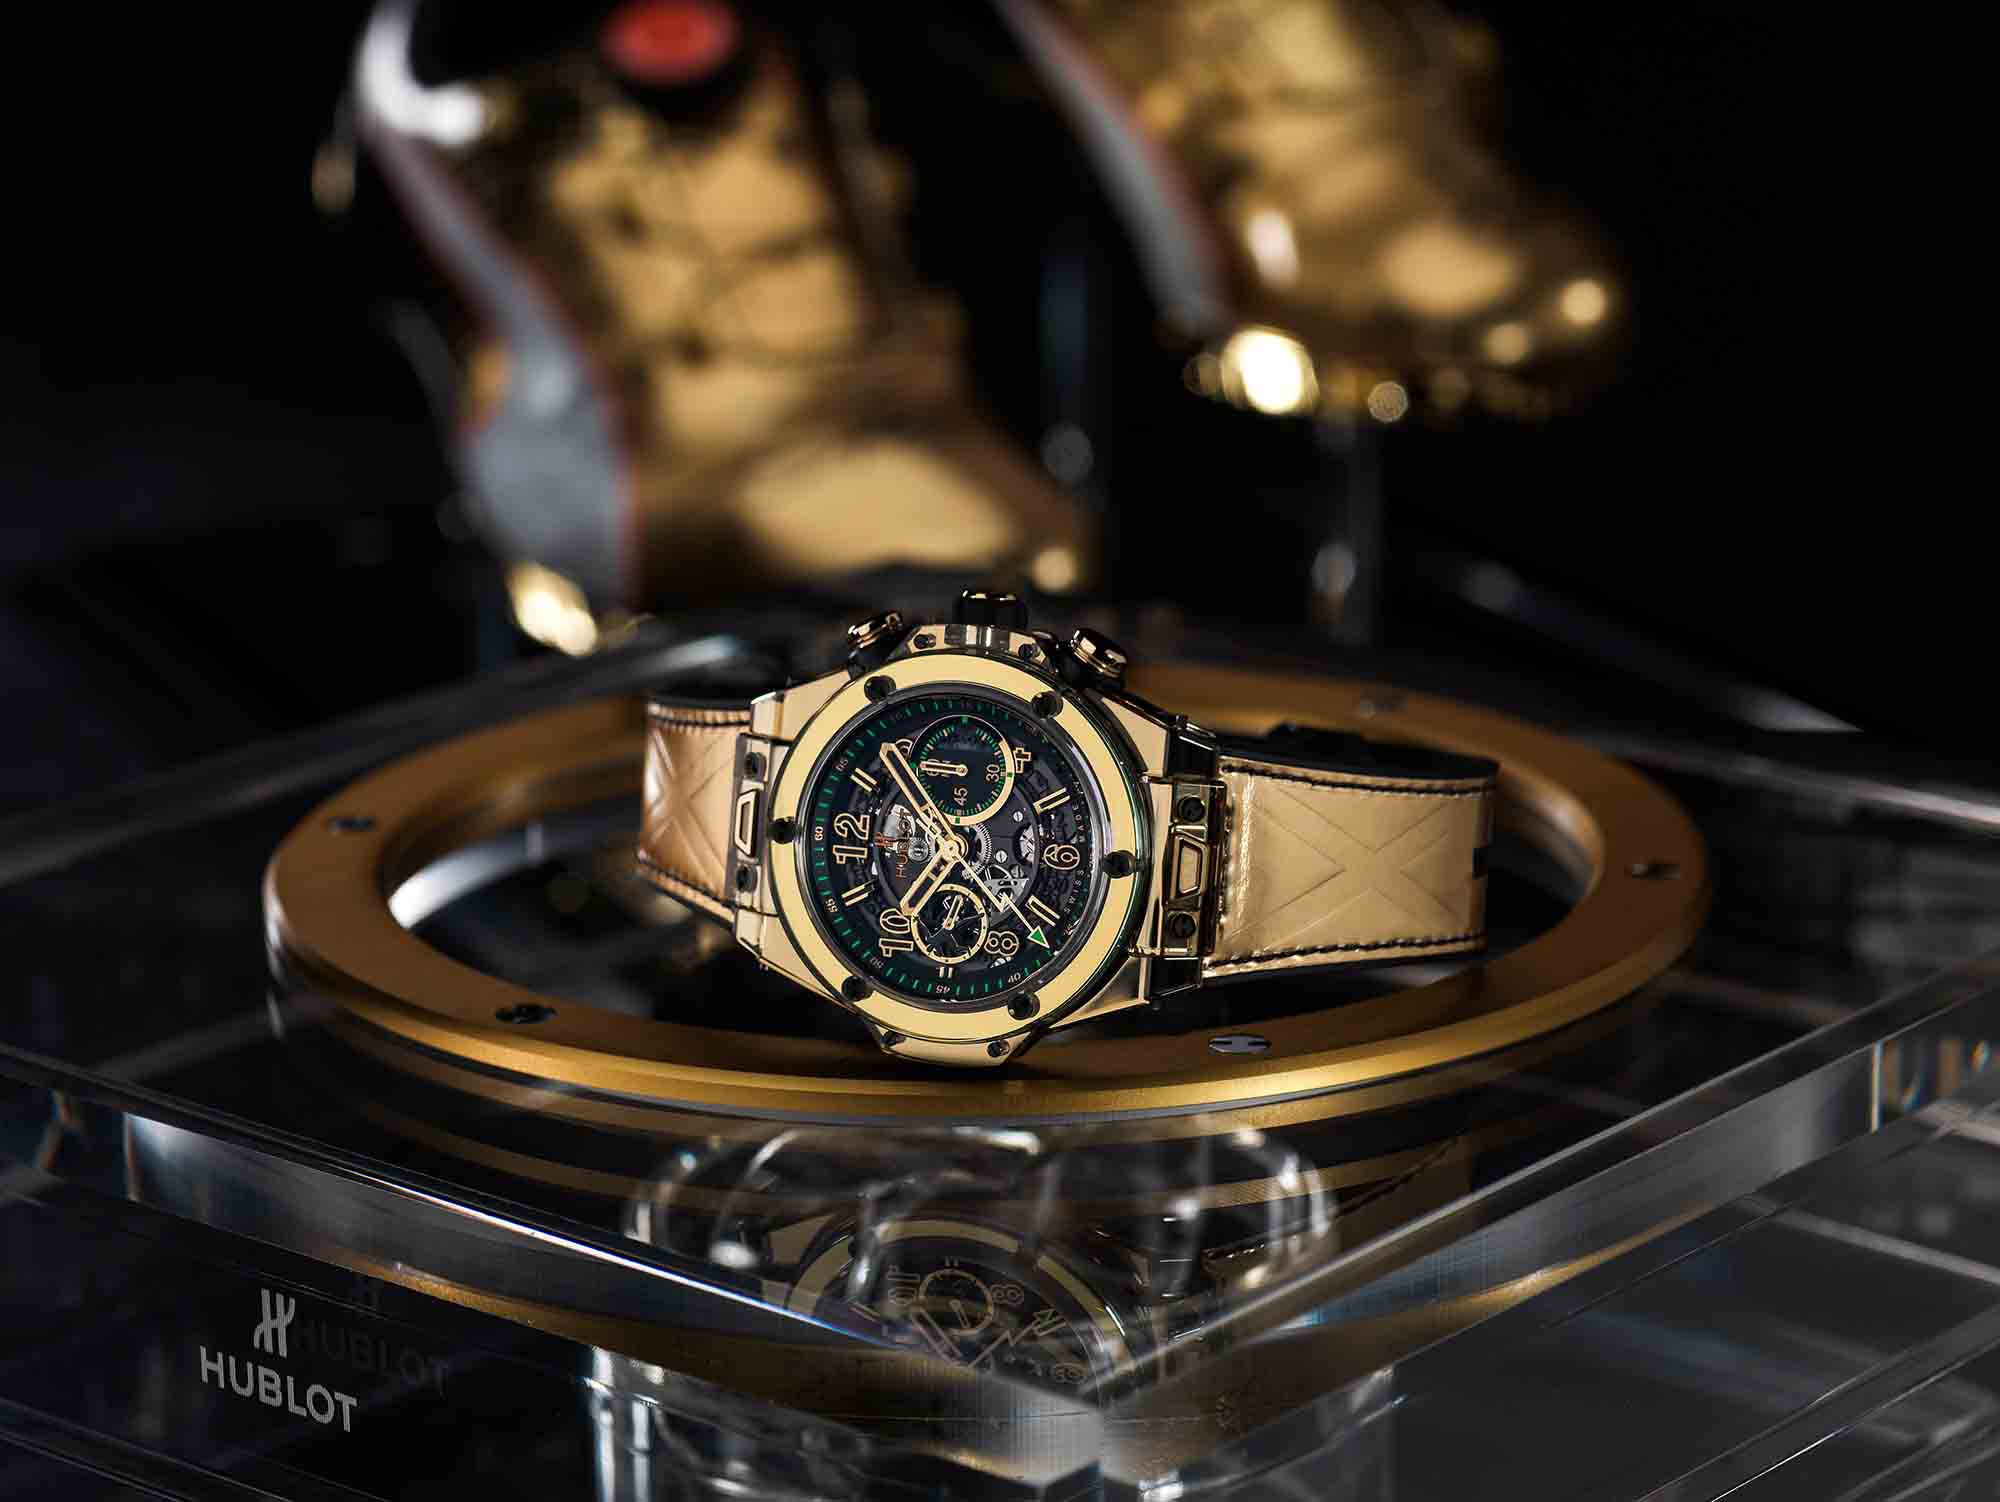 The number of the limited edition is engraved on the sapphire glass back using a highly delicate procedure. The seconds hand on the black dial with golden markings is shaped like lightning, in reference to Usain Bolt’s nickname. The crown and push buttons are in 18 carat gold—the colour of victory.